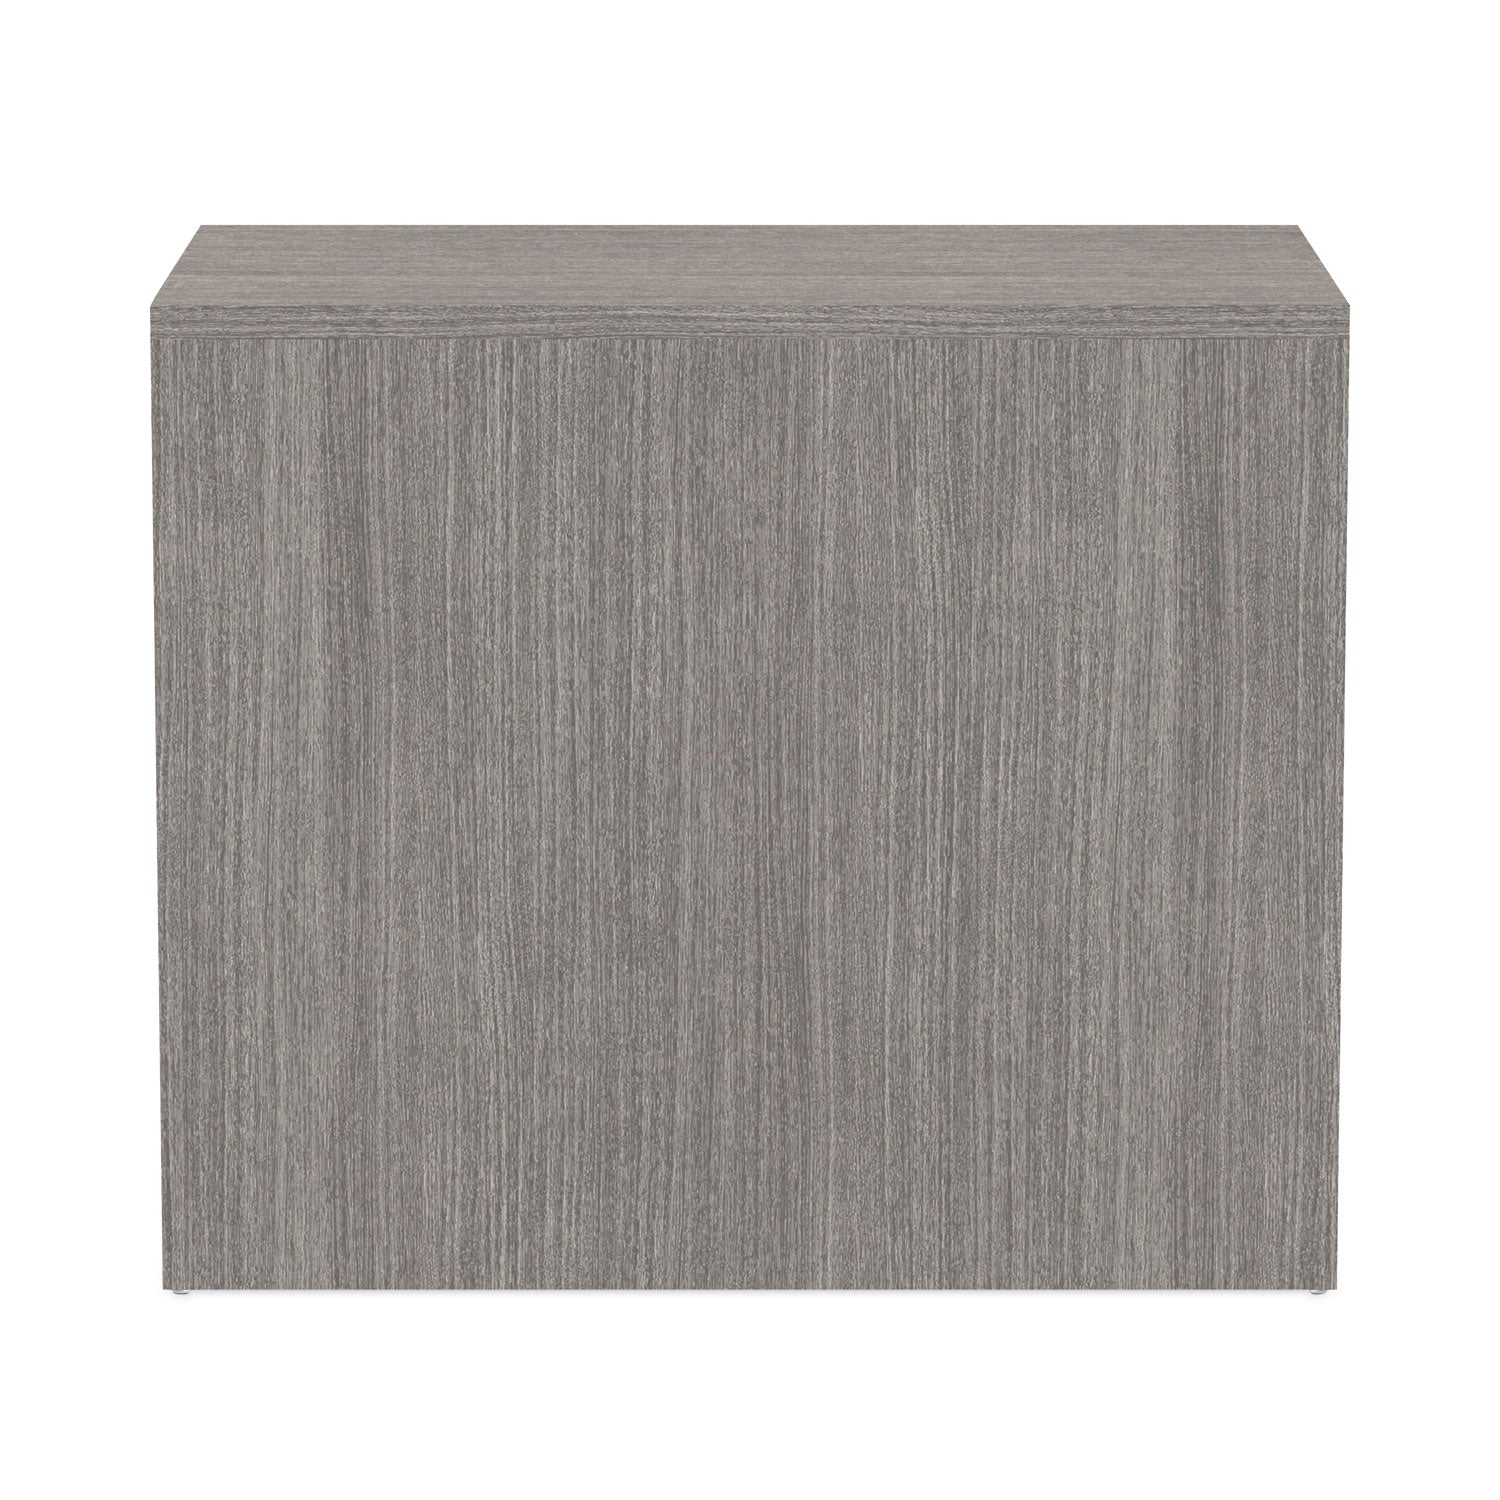 alera-valencia-series-lateral-file-2-legal-letter-size-file-drawers-gray-34-x-2275-x-295_aleva513622gy - 5